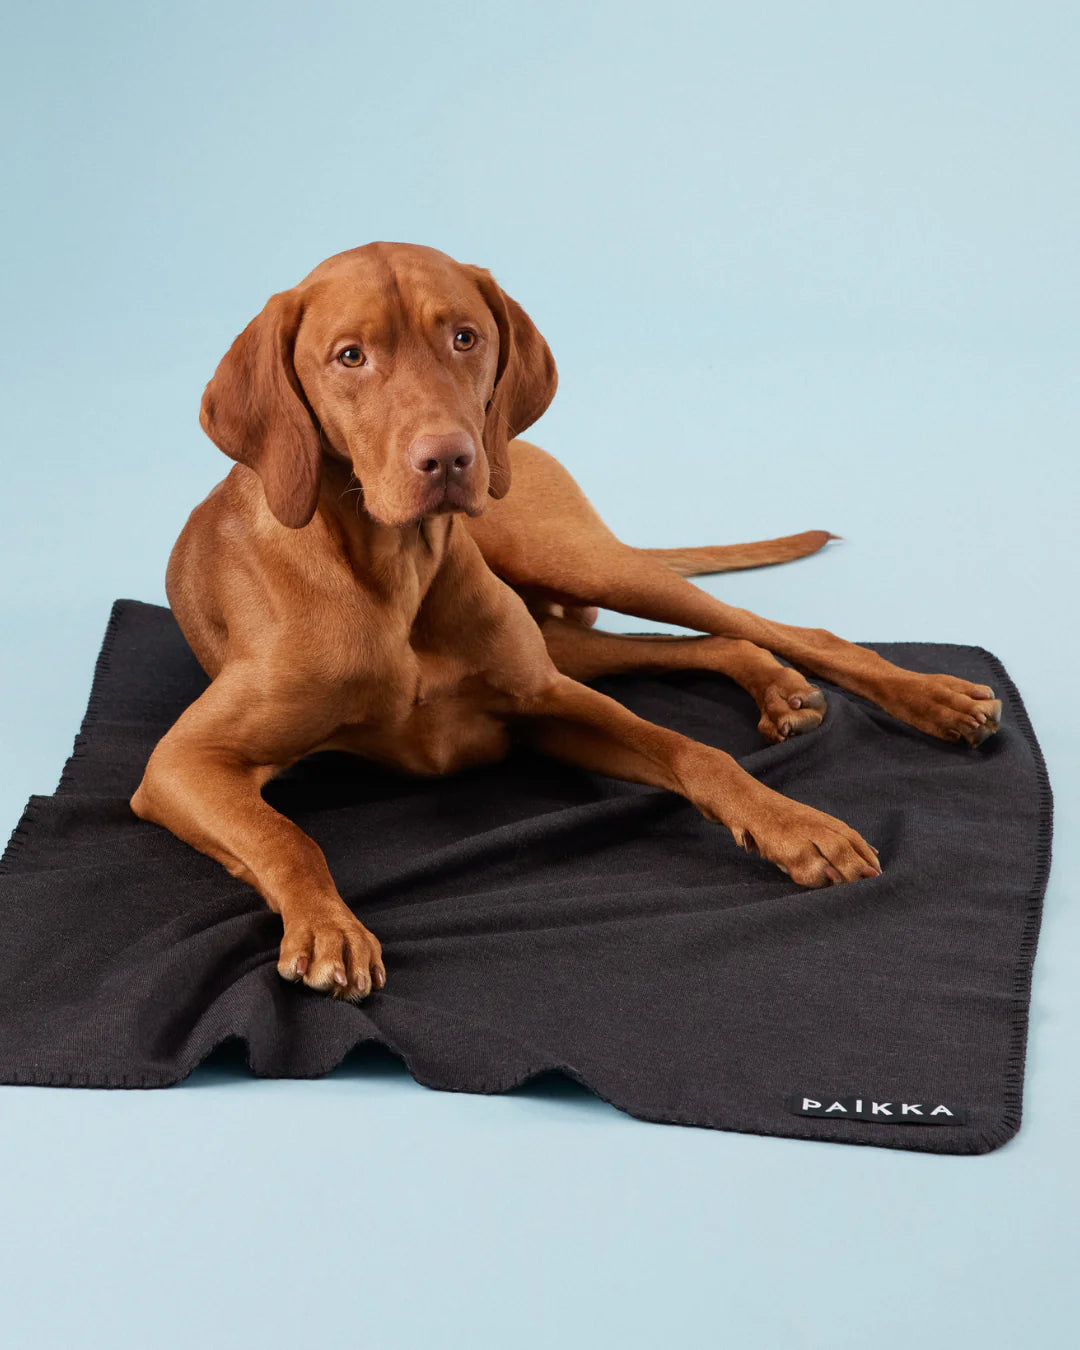 Recovery Blanket Grey for Dogs